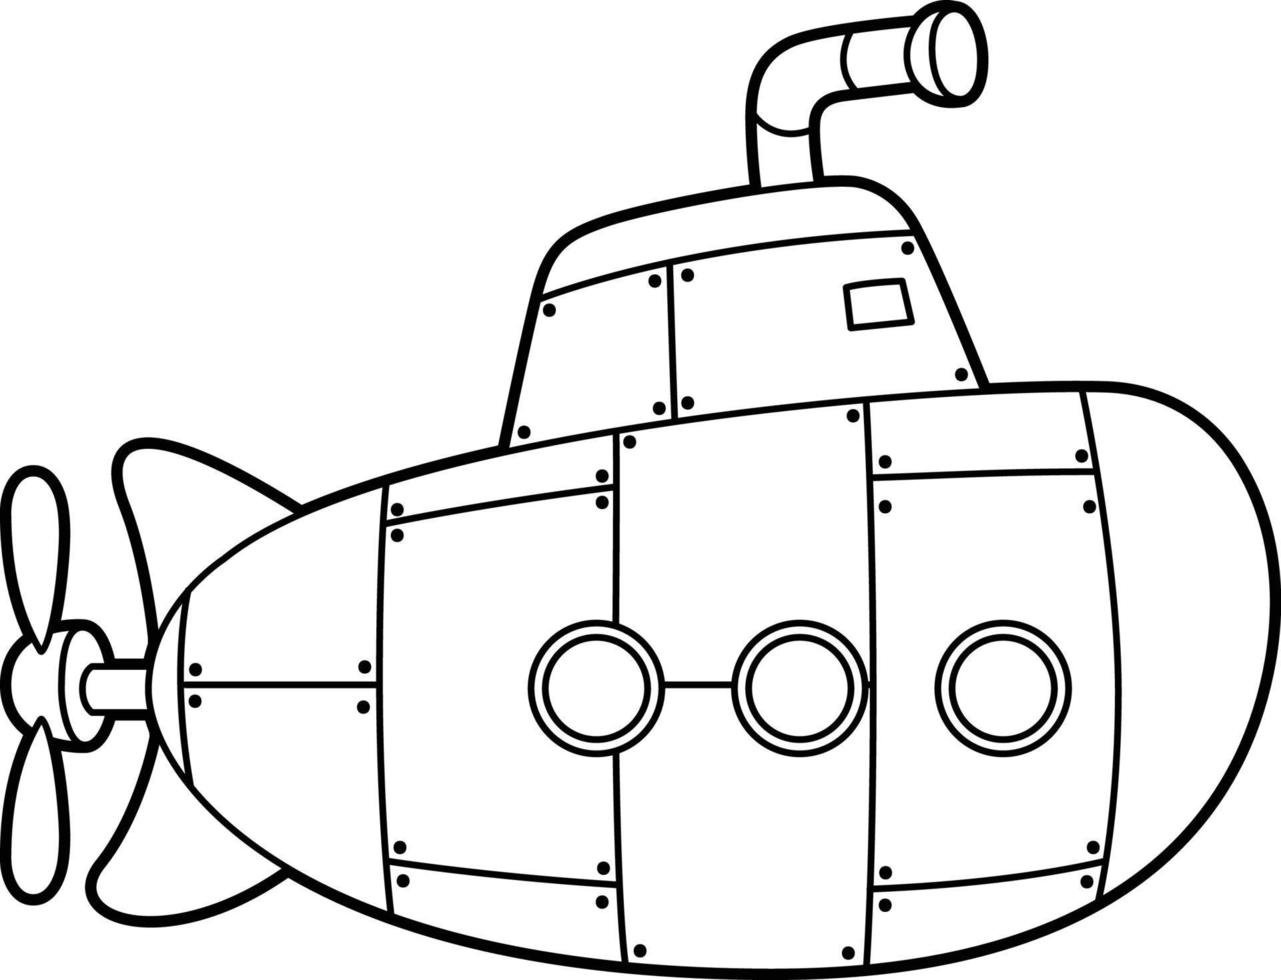 Submarine Coloring Page Isolated for Kids vector